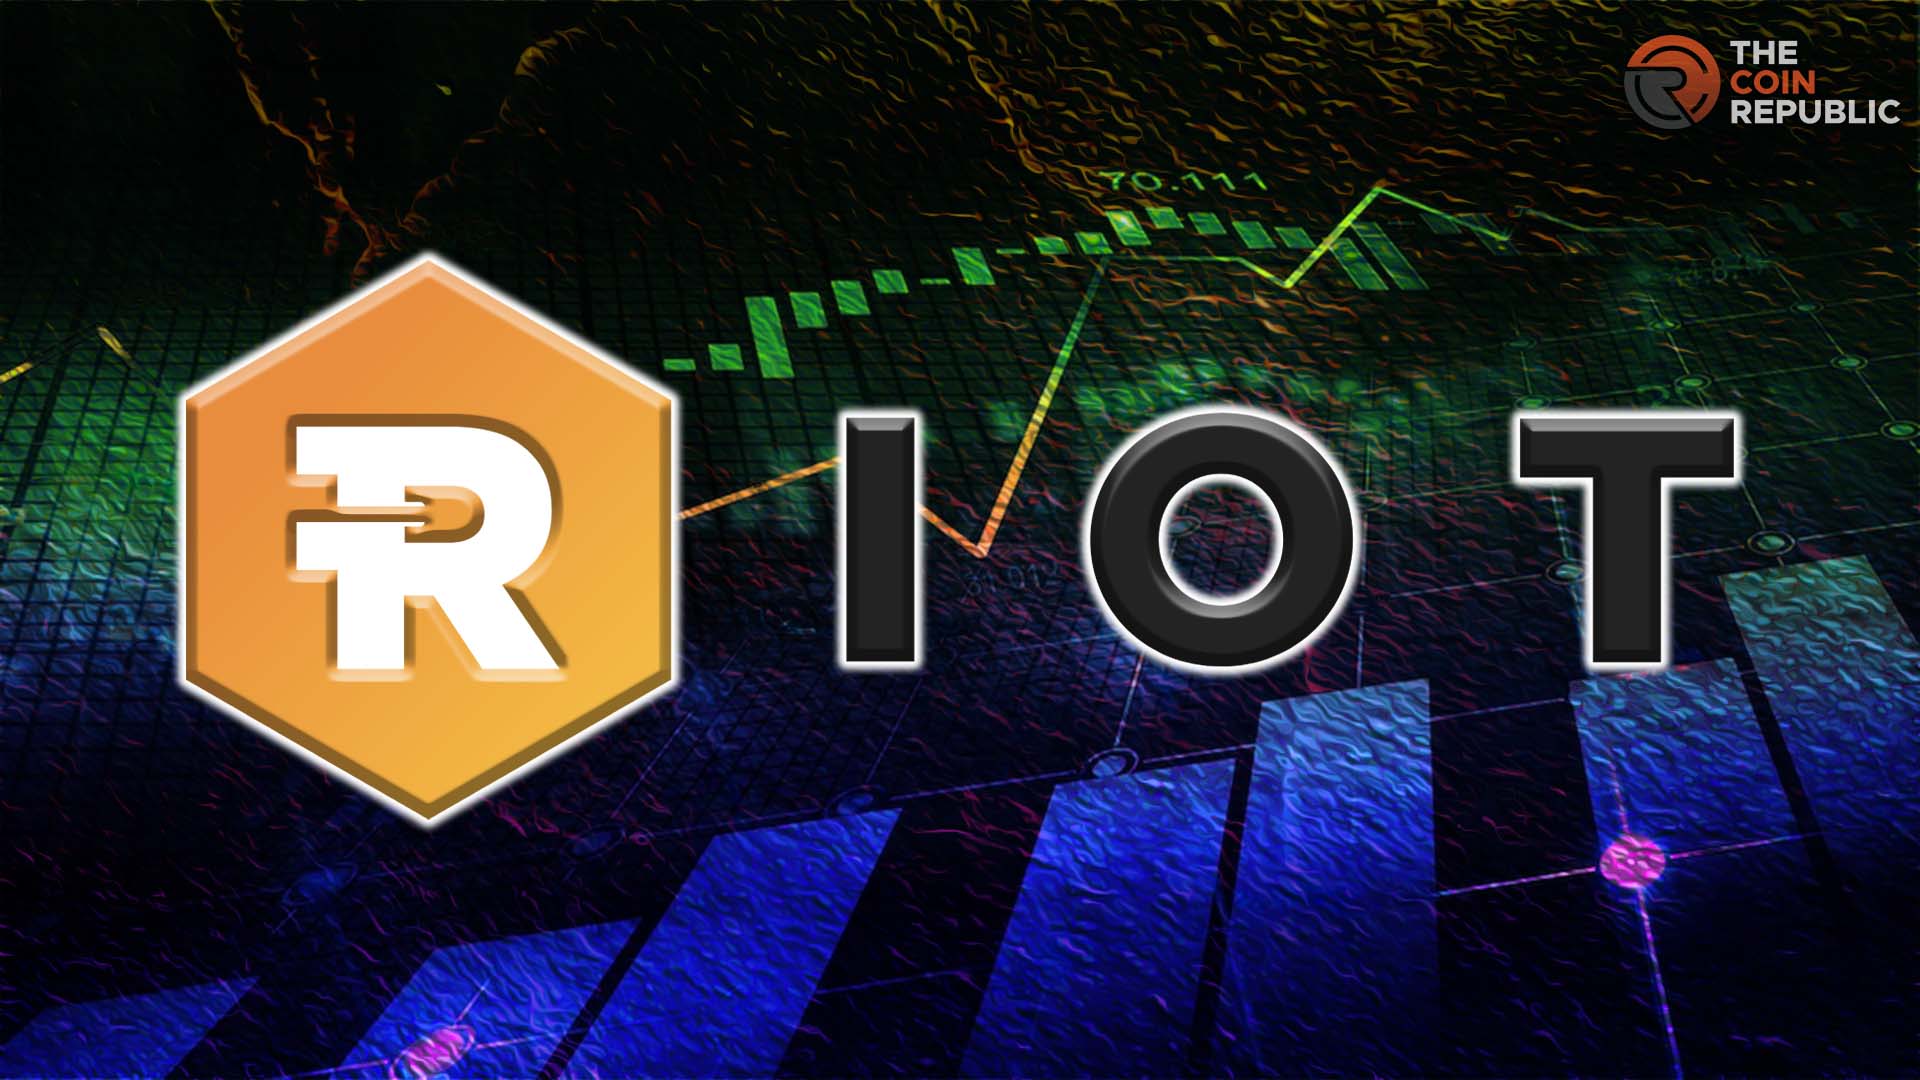 RIOT Stock Price Riot Platforms Ambushed by Bitcoin Price The Coin